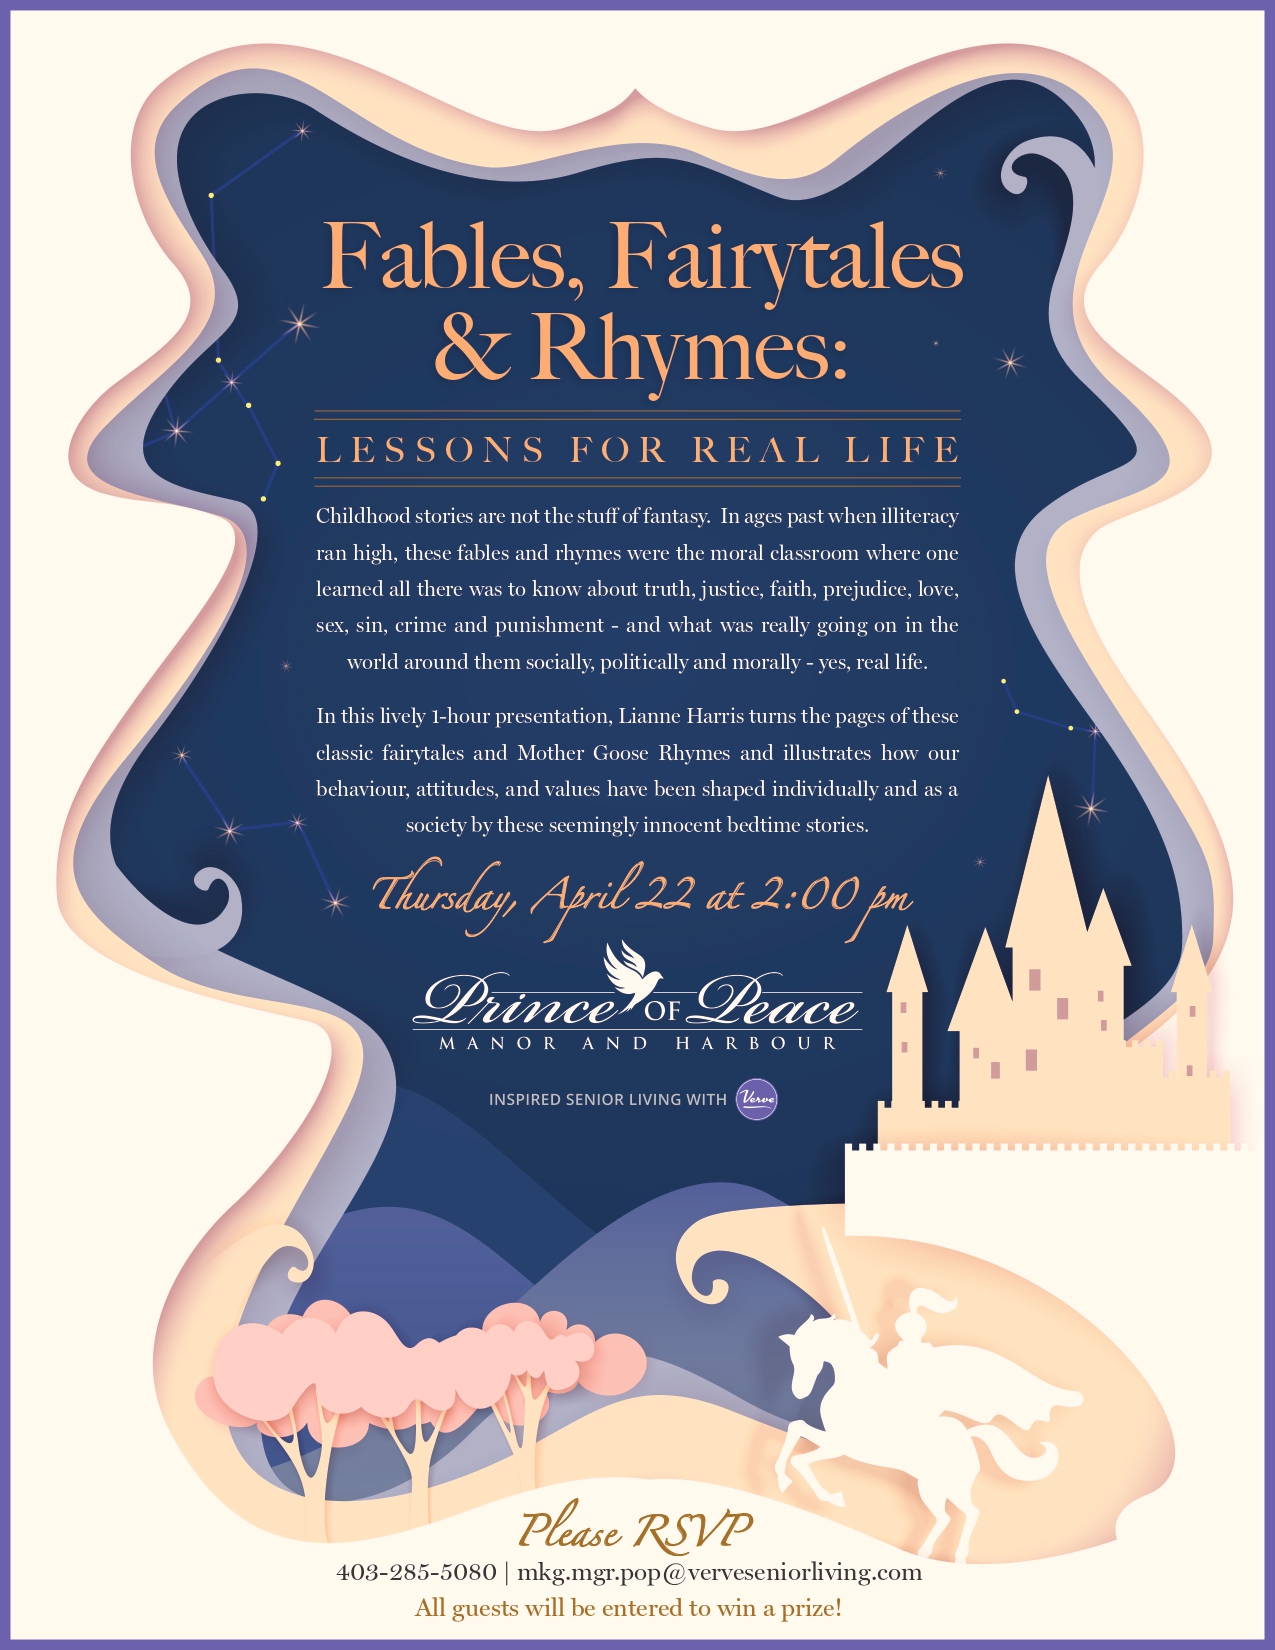 Virtual Event | Fables, Fairytales & Rhymes